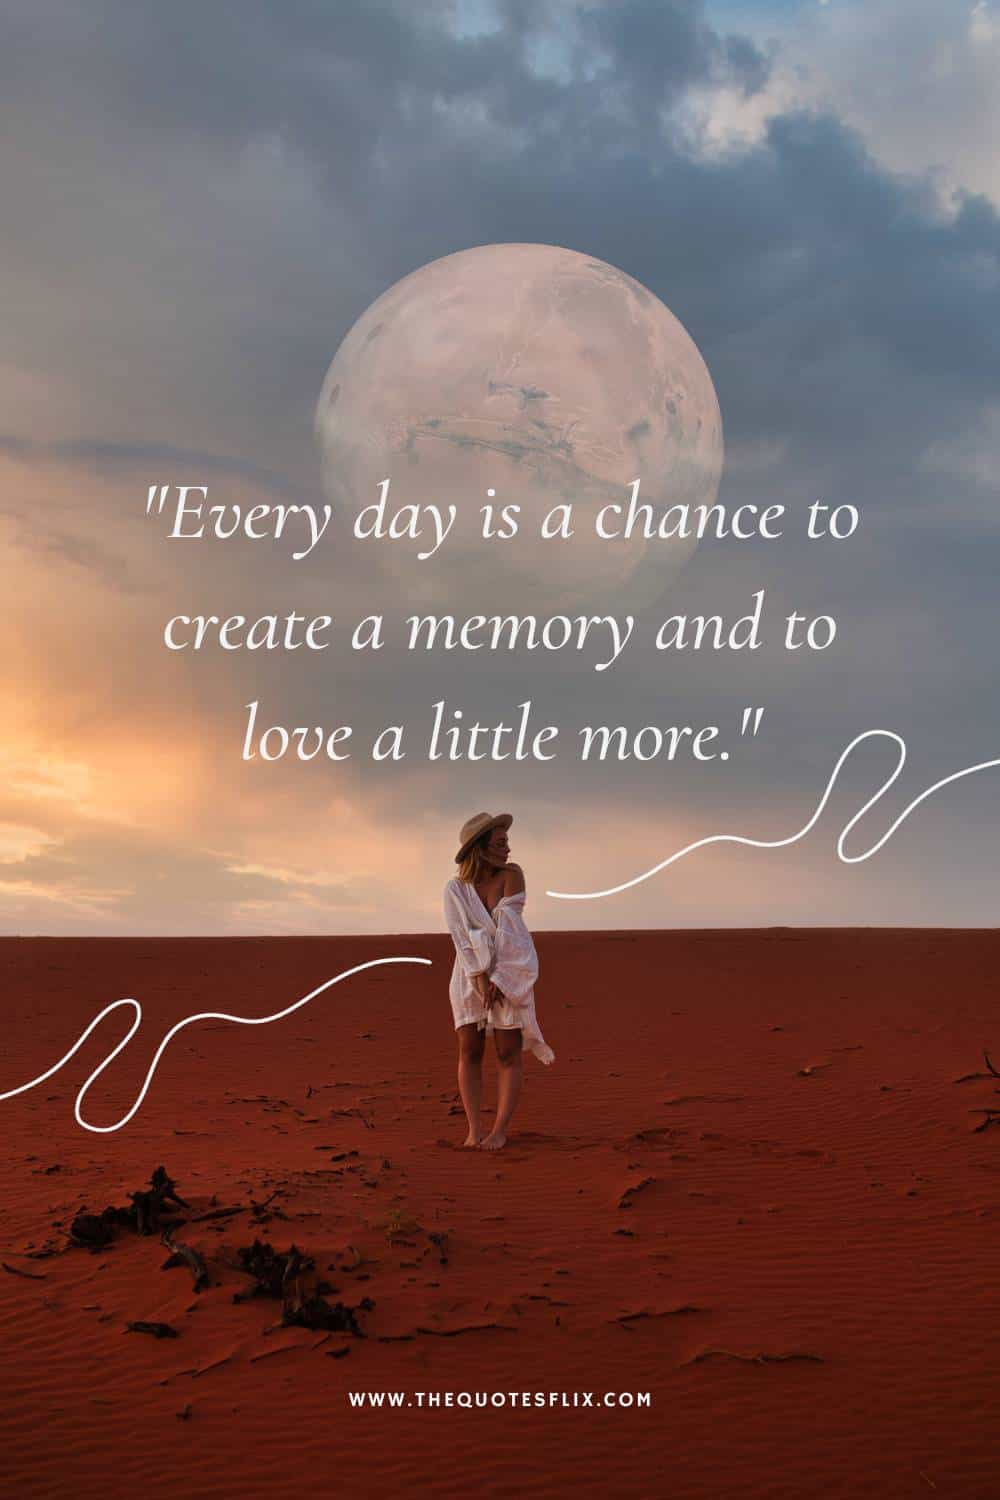 inspirational cancer survivor quotes - every day is chance to create memory